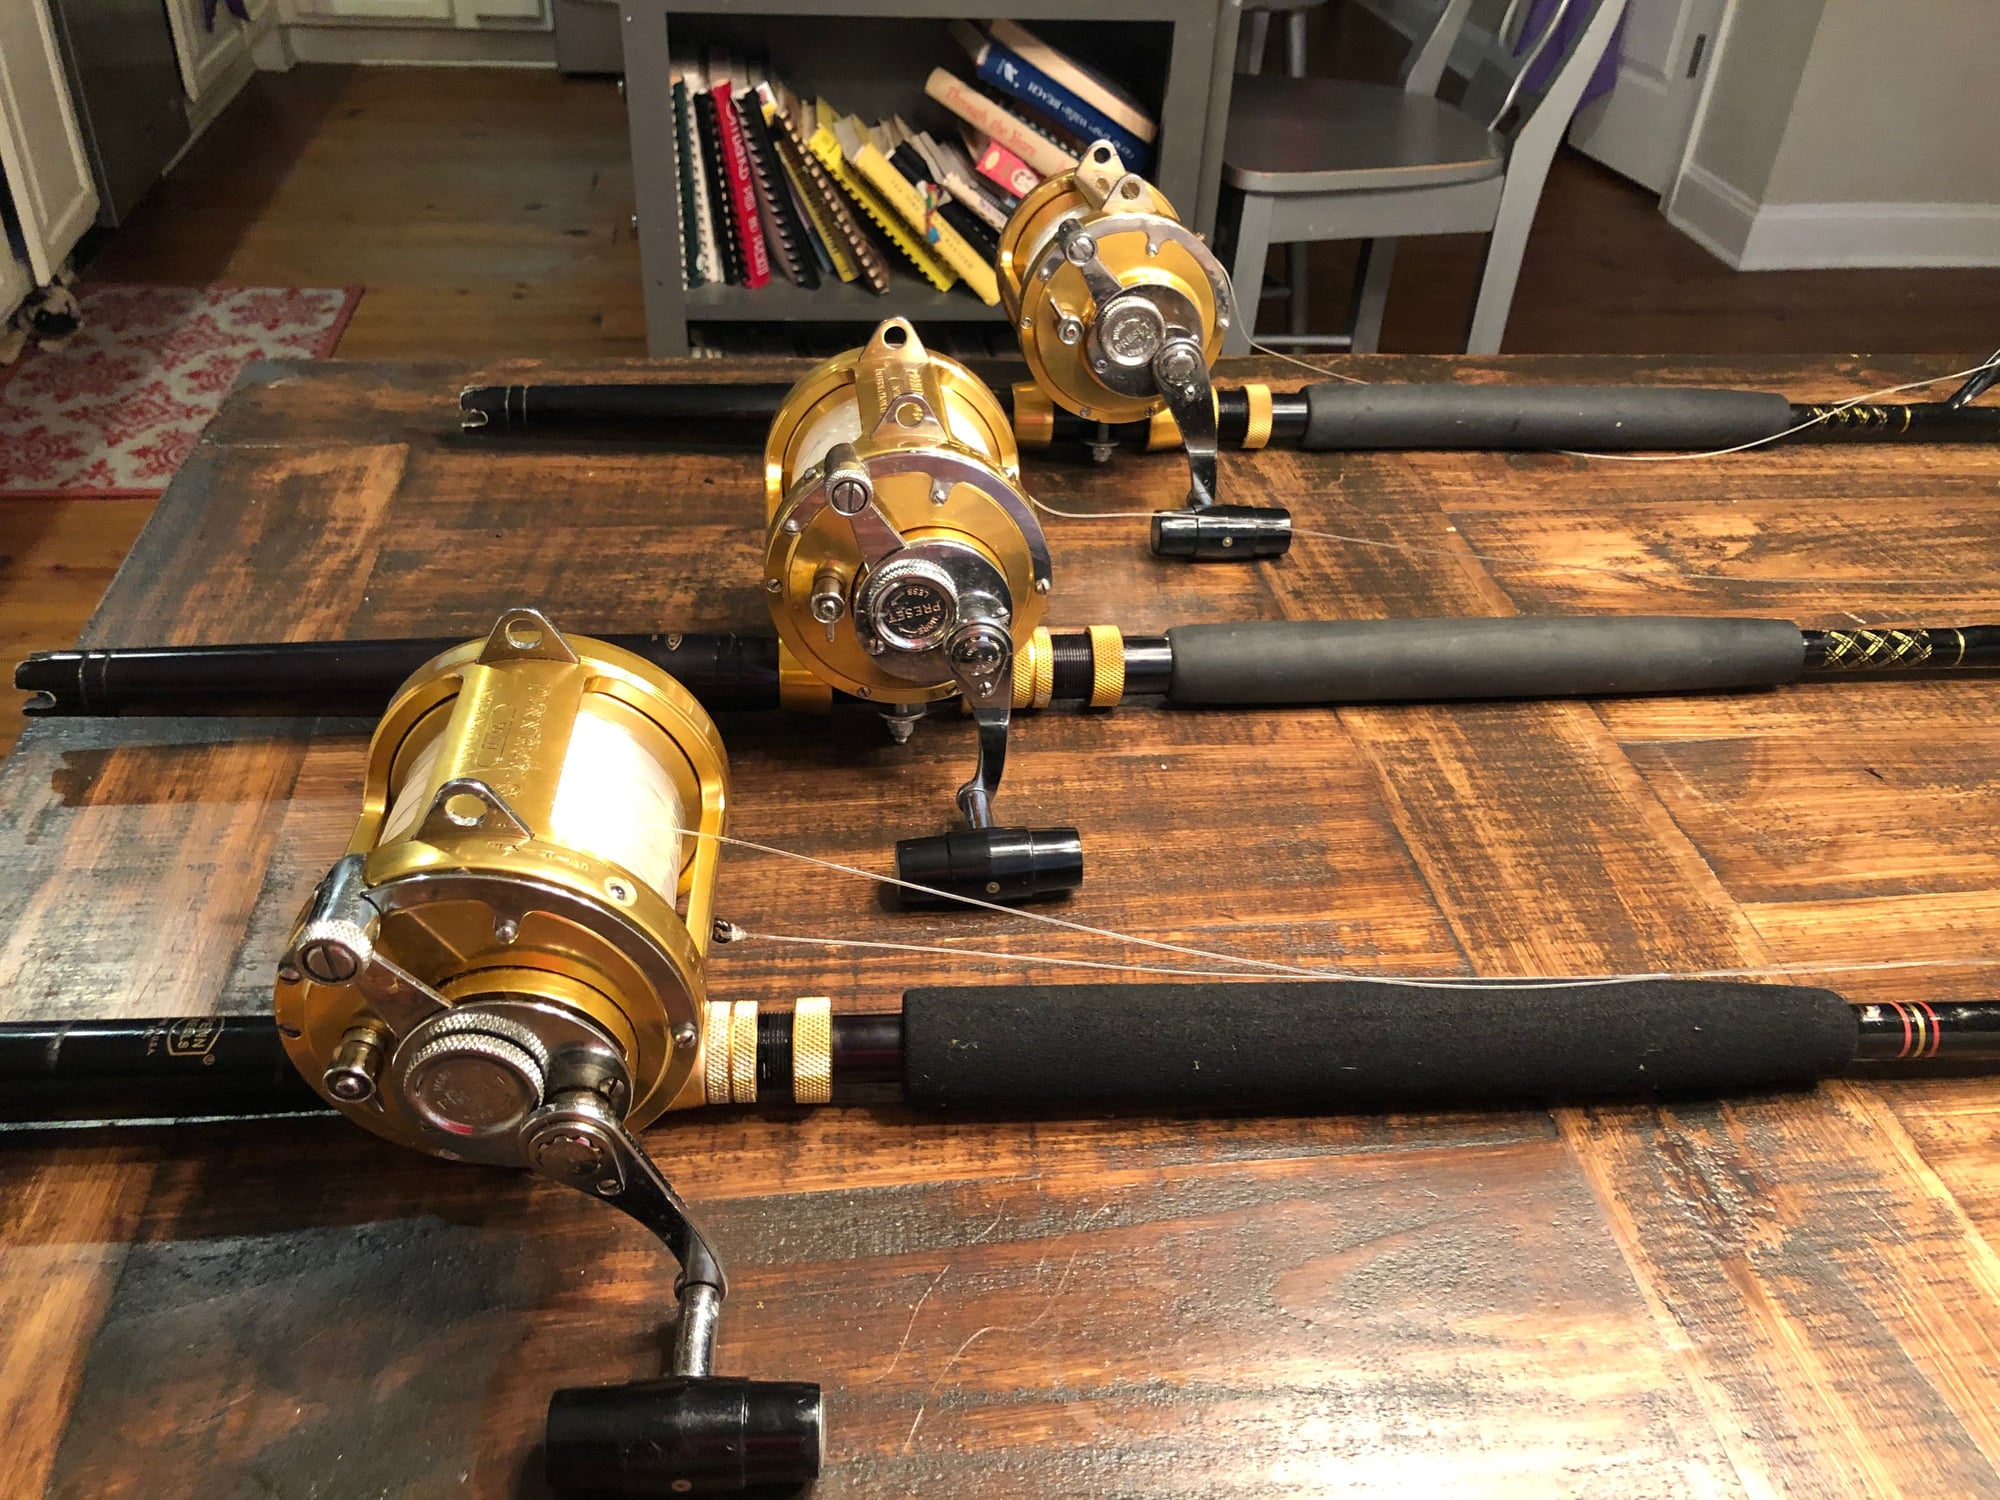 3 Penn international 2 50tw & rod combos. - The Hull Truth - Boating and  Fishing Forum